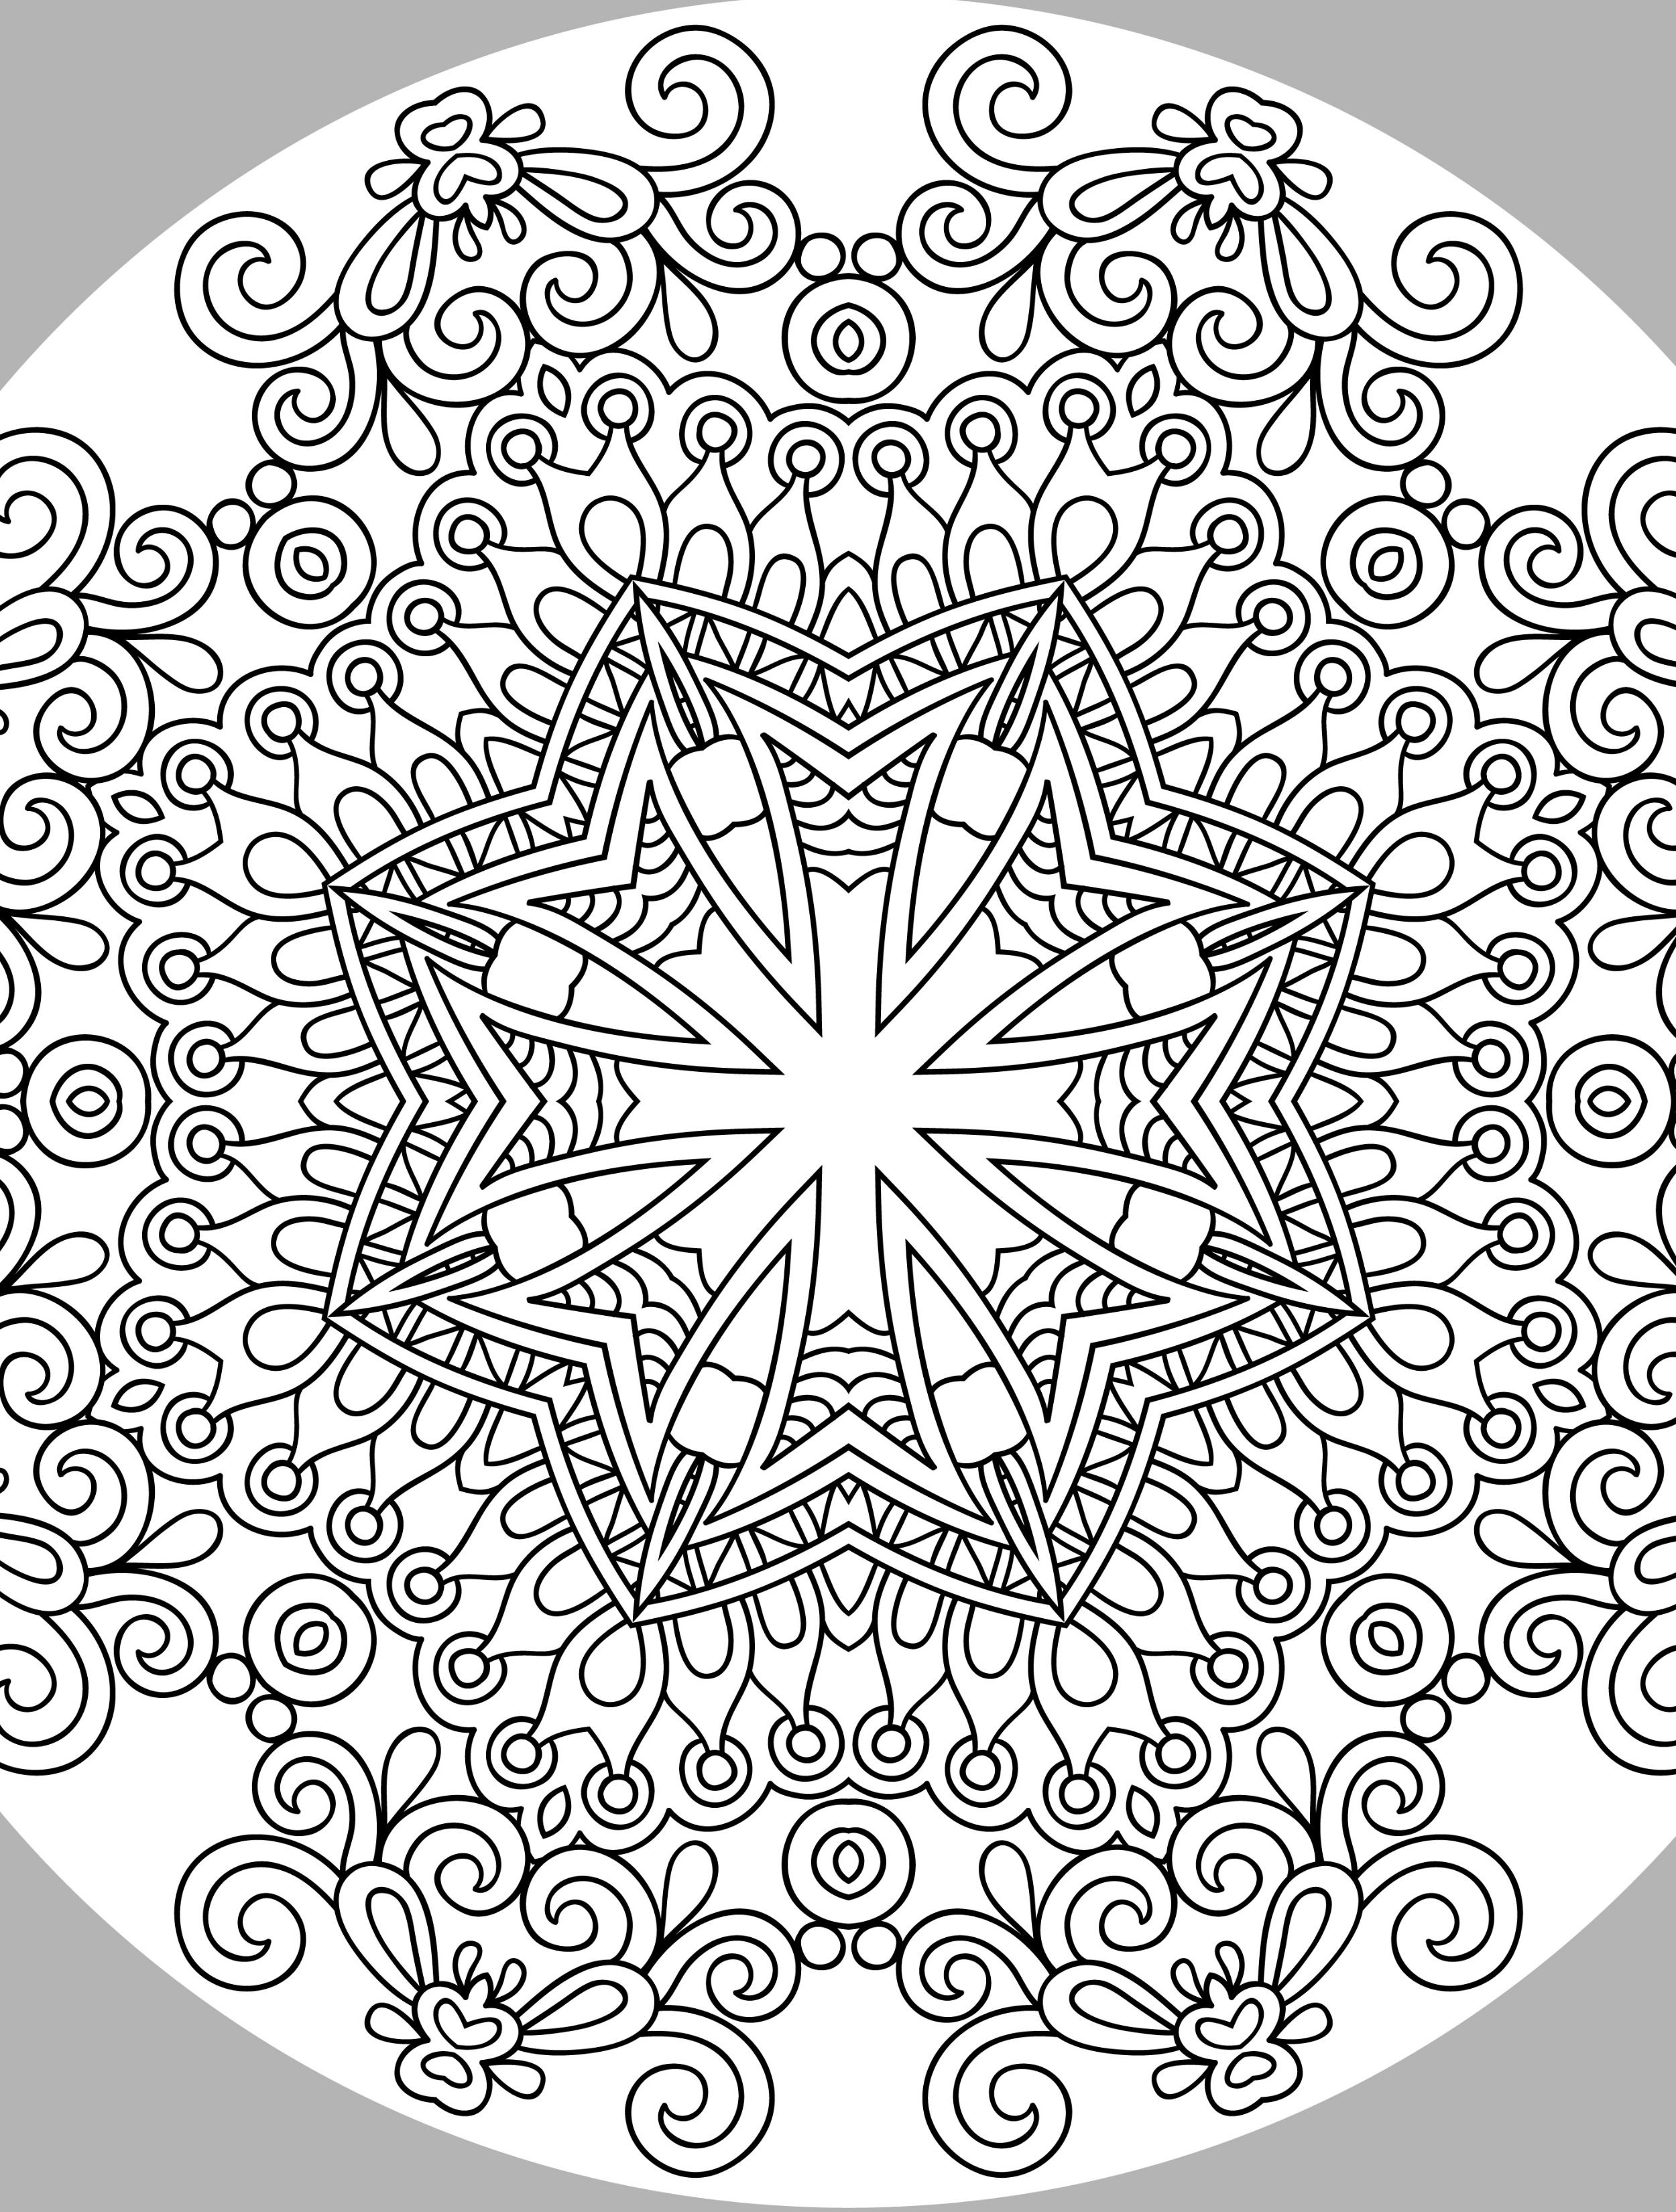 10 Free Printable Holiday Adult Coloring Pages | Printables | Adult - Free Printable Holiday Coloring Pages